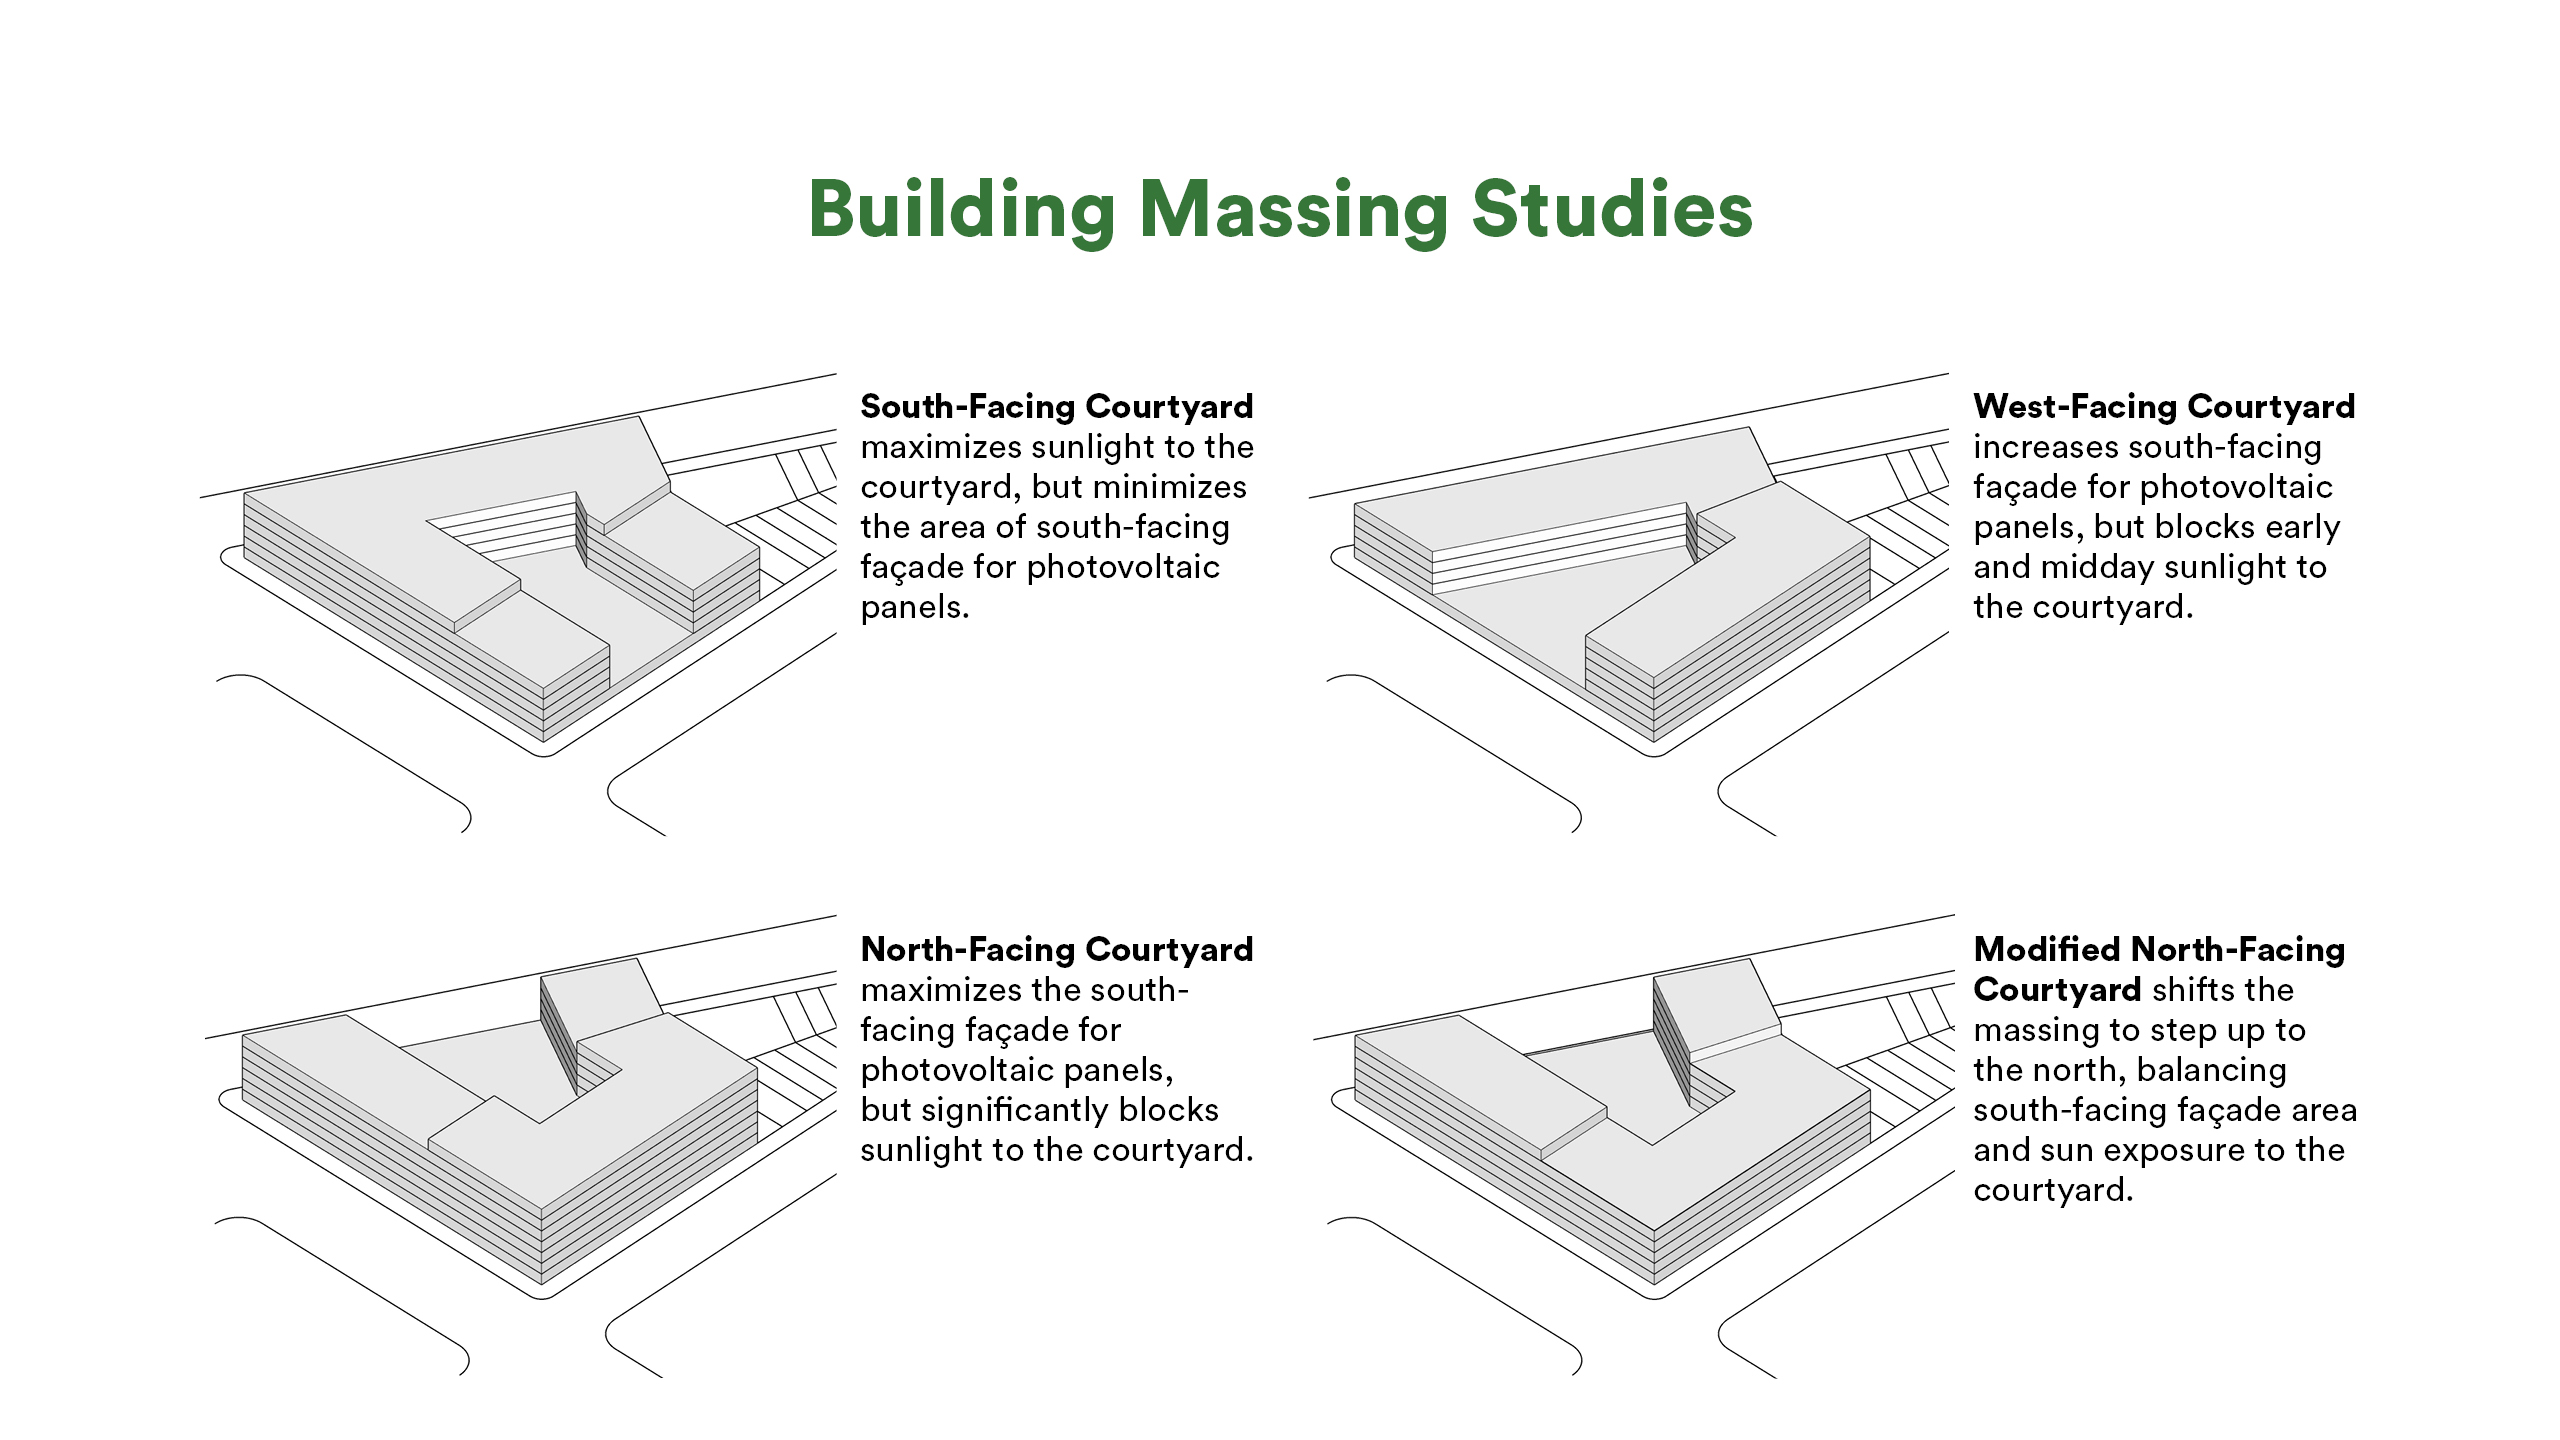 Figure 2-The Branches Building Massing Study